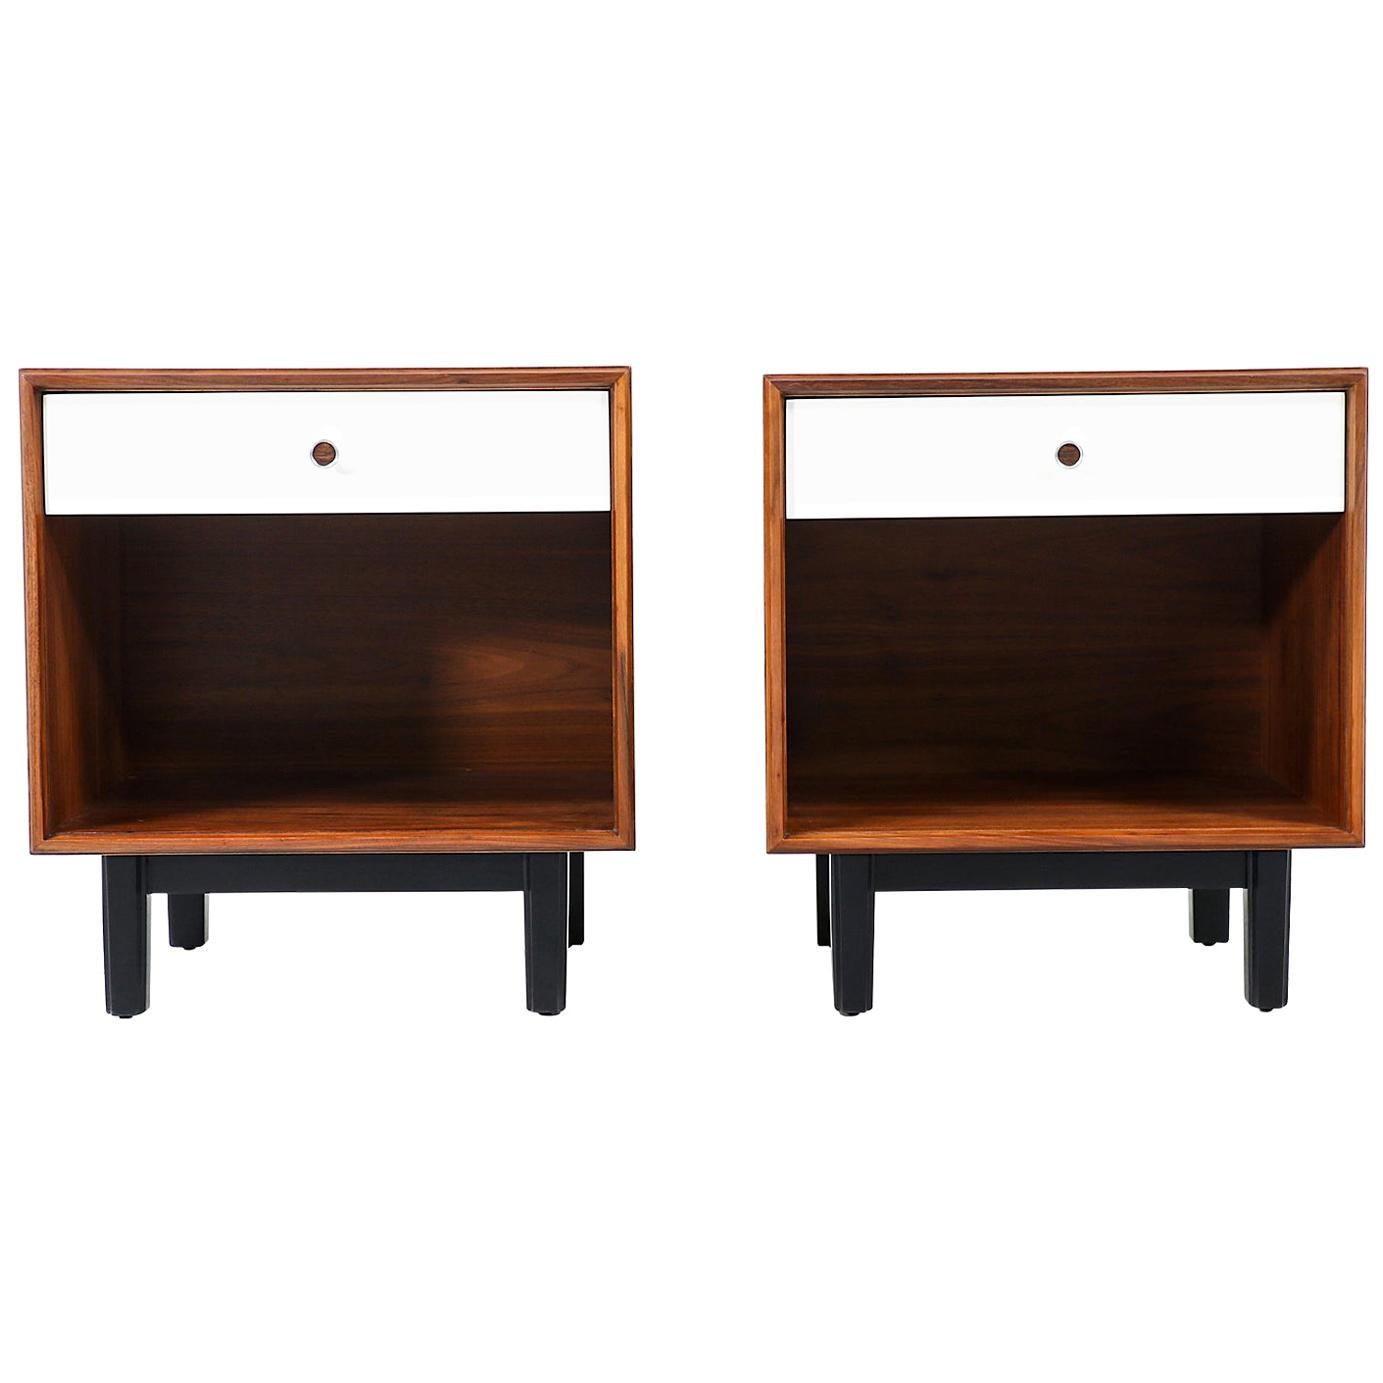 Milo Baughman Two-Tone Lacquered and Walnut Nightstands for Glenn of California